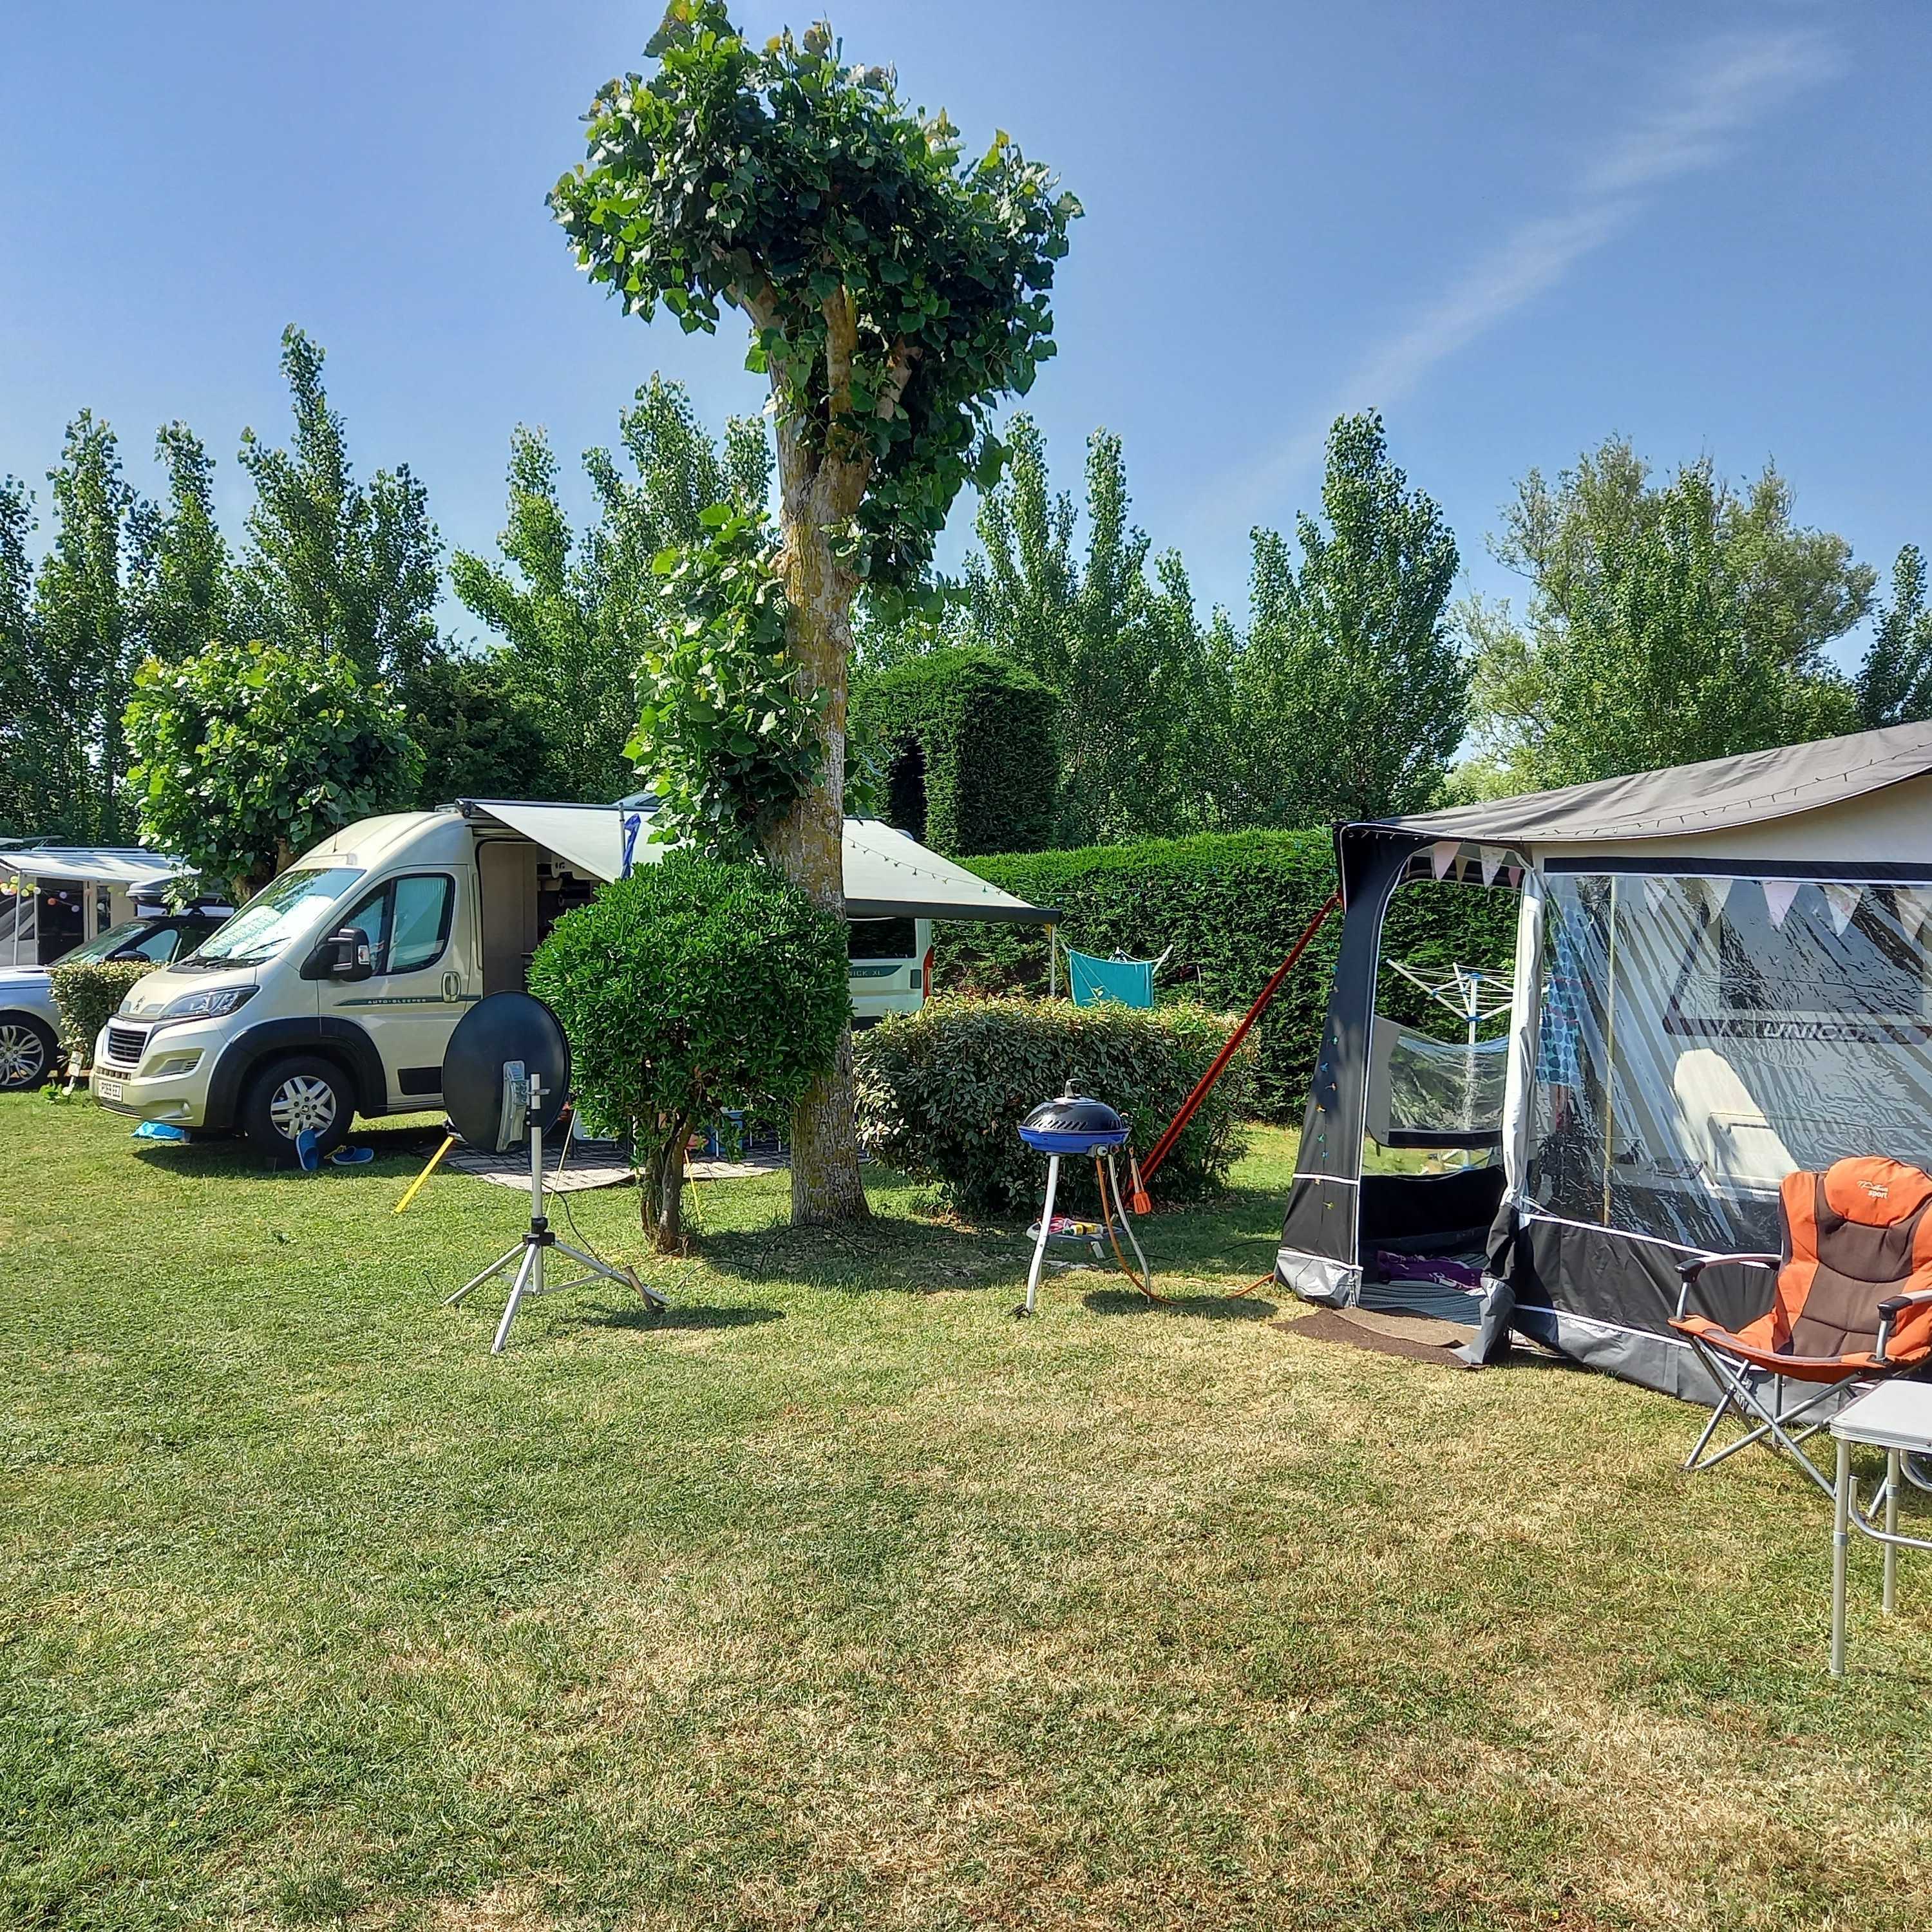 Pitch camper van  – 7.50 m  (water, electricity, drain, 2 people and 1 vehicle) 1/2 Ppl. 1/2 Ppl.